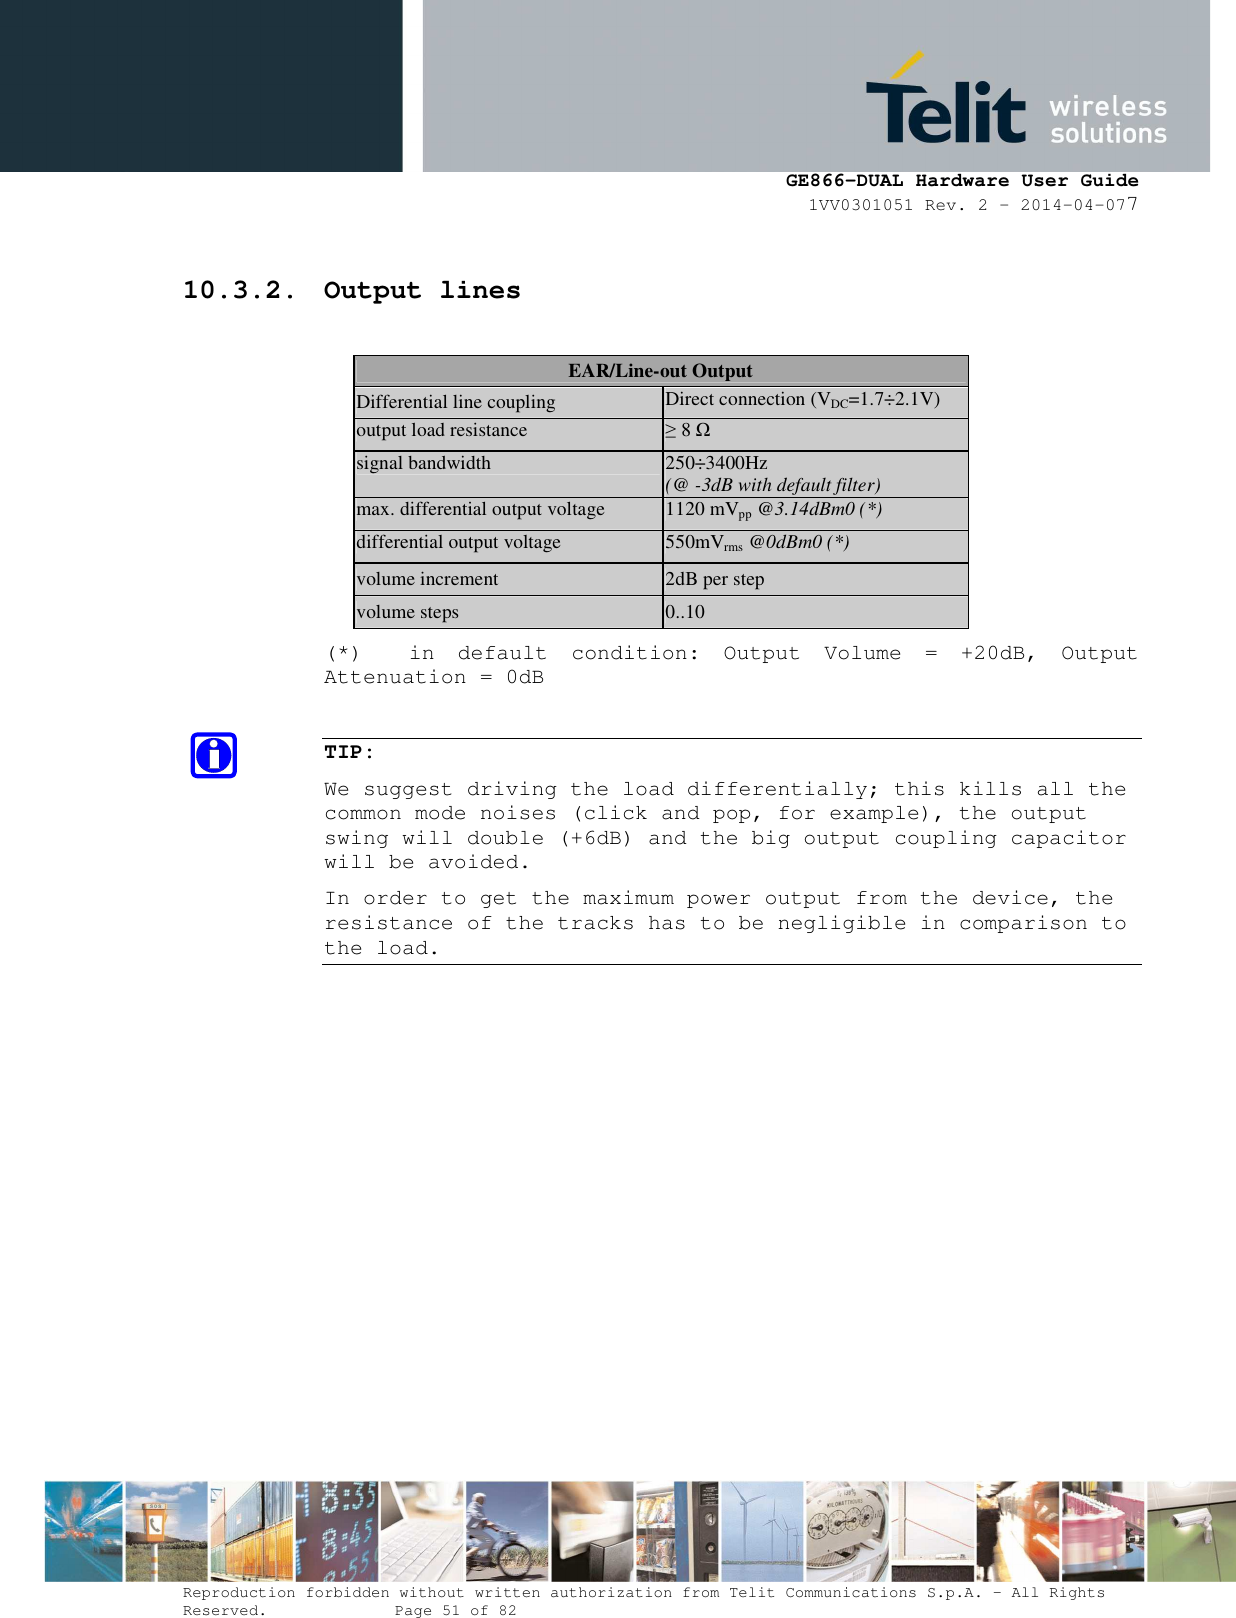      GE866-DUAL Hardware User Guide 1VV0301051 Rev. 2 – 2014-04-077  Reproduction forbidden without written authorization from Telit Communications S.p.A. - All Rights Reserved.    Page 51 of 82 Mod. 0805 2011-07 Rev.2 10.3.2. Output lines  EAR/Line-out Output Differential line coupling  Direct connection (VDC=1.7÷2.1V) output load resistance  ≥ 8 Ω signal bandwidth  250÷3400Hz (@ -3dB with default filter) max. differential output voltage 1120 mVpp @3.14dBm0 (*) differential output voltage  550mVrms @0dBm0 (*) volume increment  2dB per step volume steps  0..10 (*)    in  default  condition:  Output  Volume  =  +20dB,  Output Attenuation = 0dB  TIP:  We suggest driving the load differentially; this kills all the common mode noises (click and pop, for example), the output swing will double (+6dB) and the big output coupling capacitor will be avoided. In order to get the maximum power output from the device, the resistance of the tracks has to be negligible in comparison to the load.  